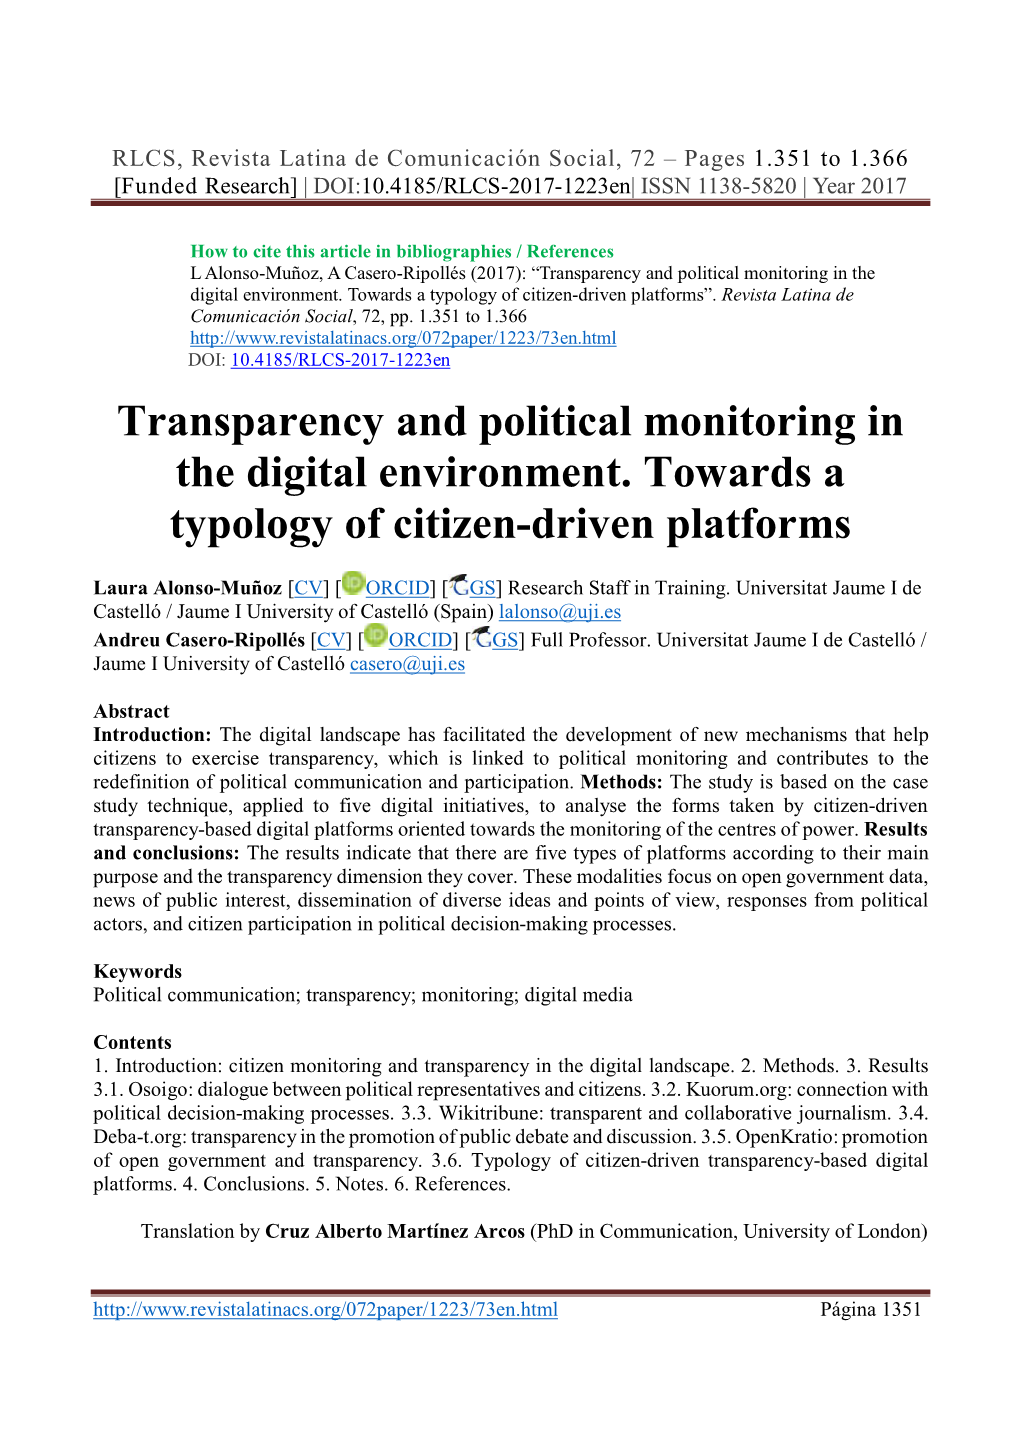 Transparency and Political Monitoring in the Digital Environment. Towards a Typology of Citizen-Driven Platforms”